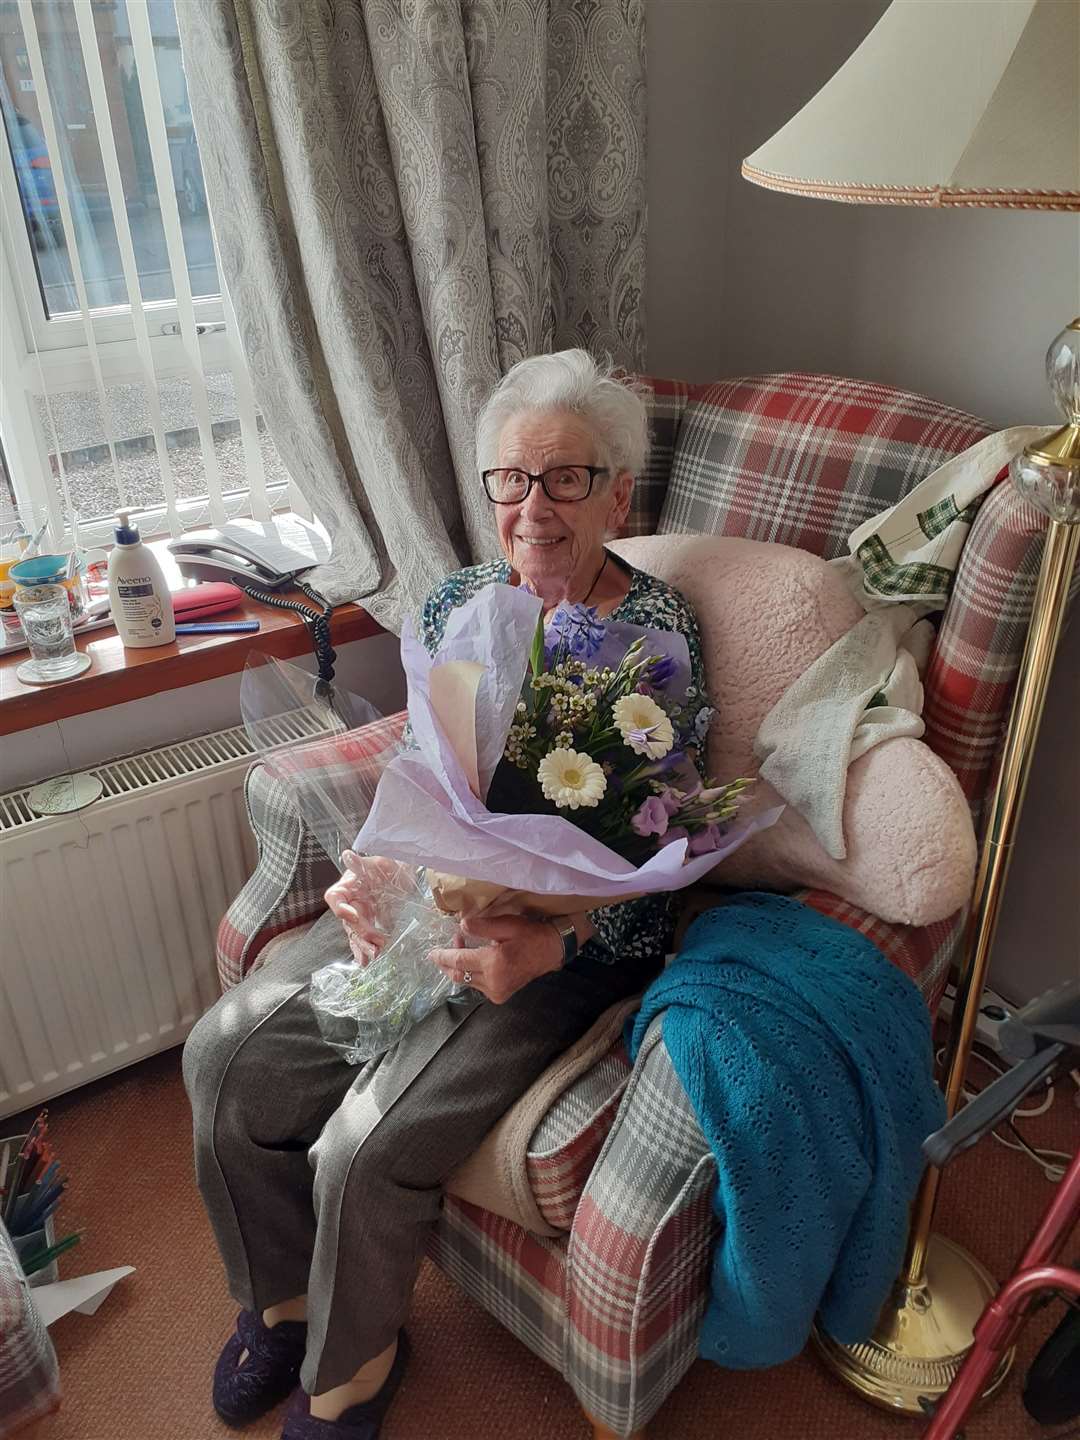 Joan with one of the birthday bouquets of flowers gifted to her by family and friends.